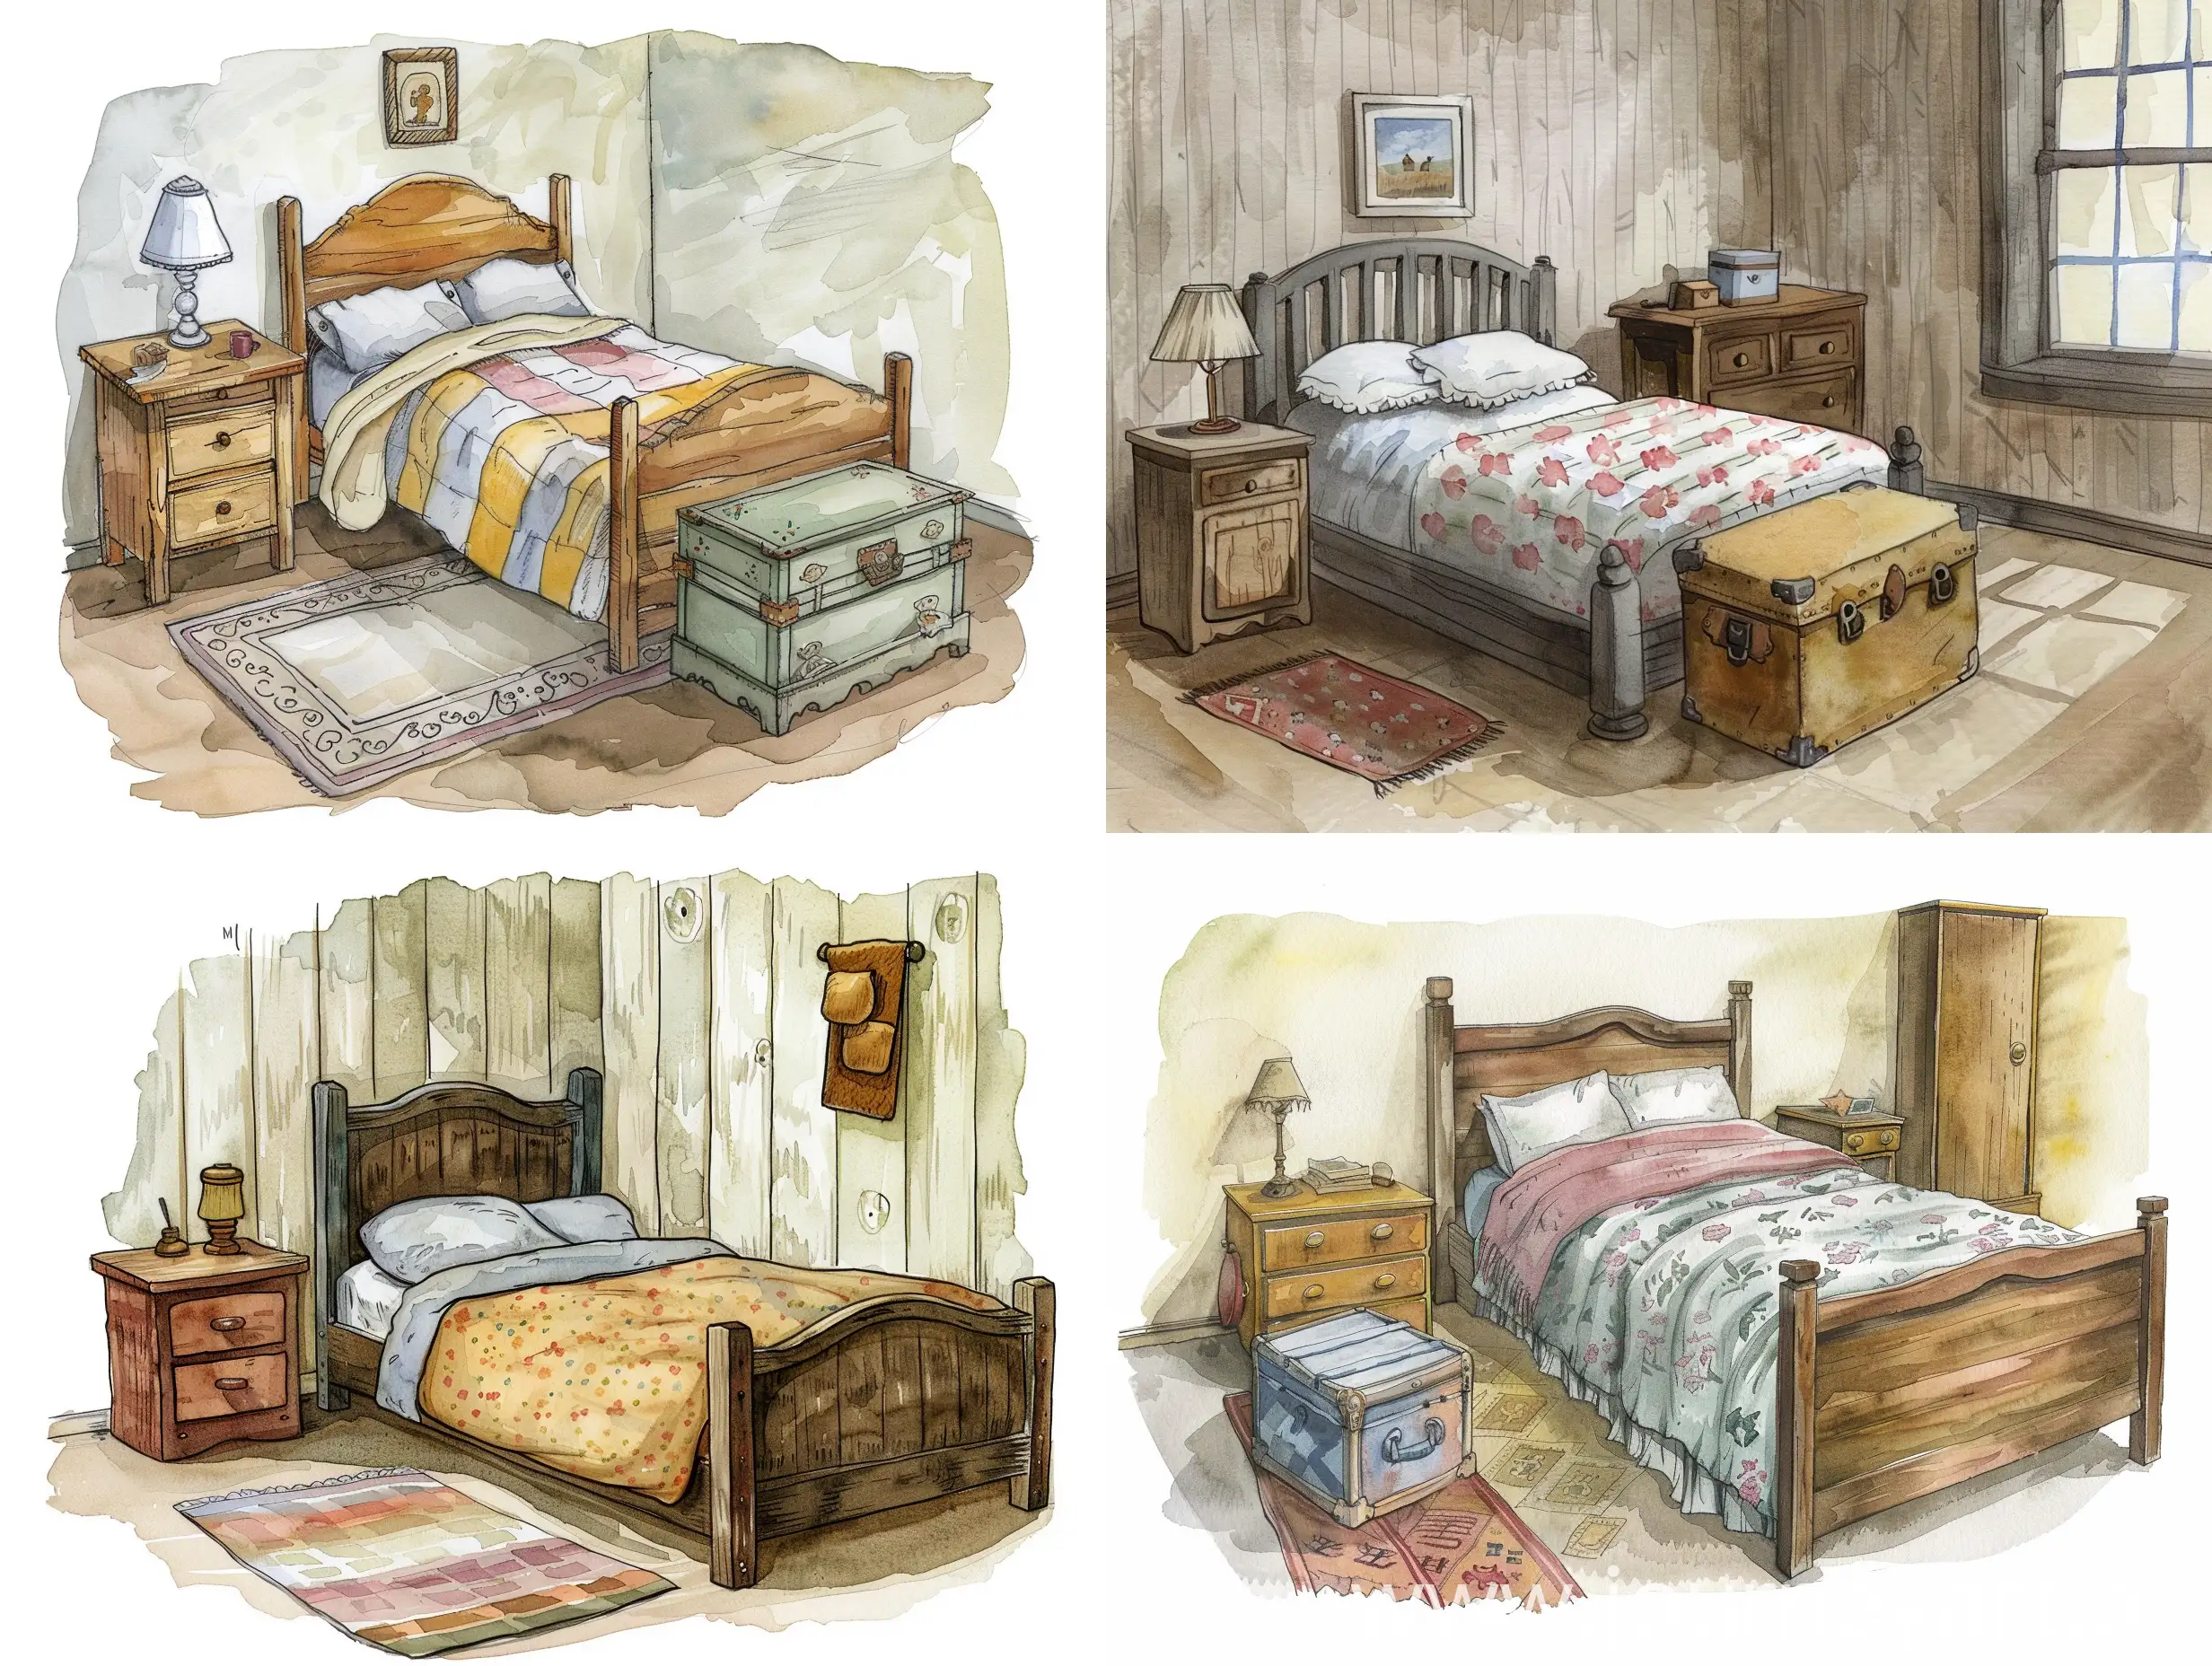 Watercolor drawing of Christopher Robin's bedroom with a bed, bedside table and chest